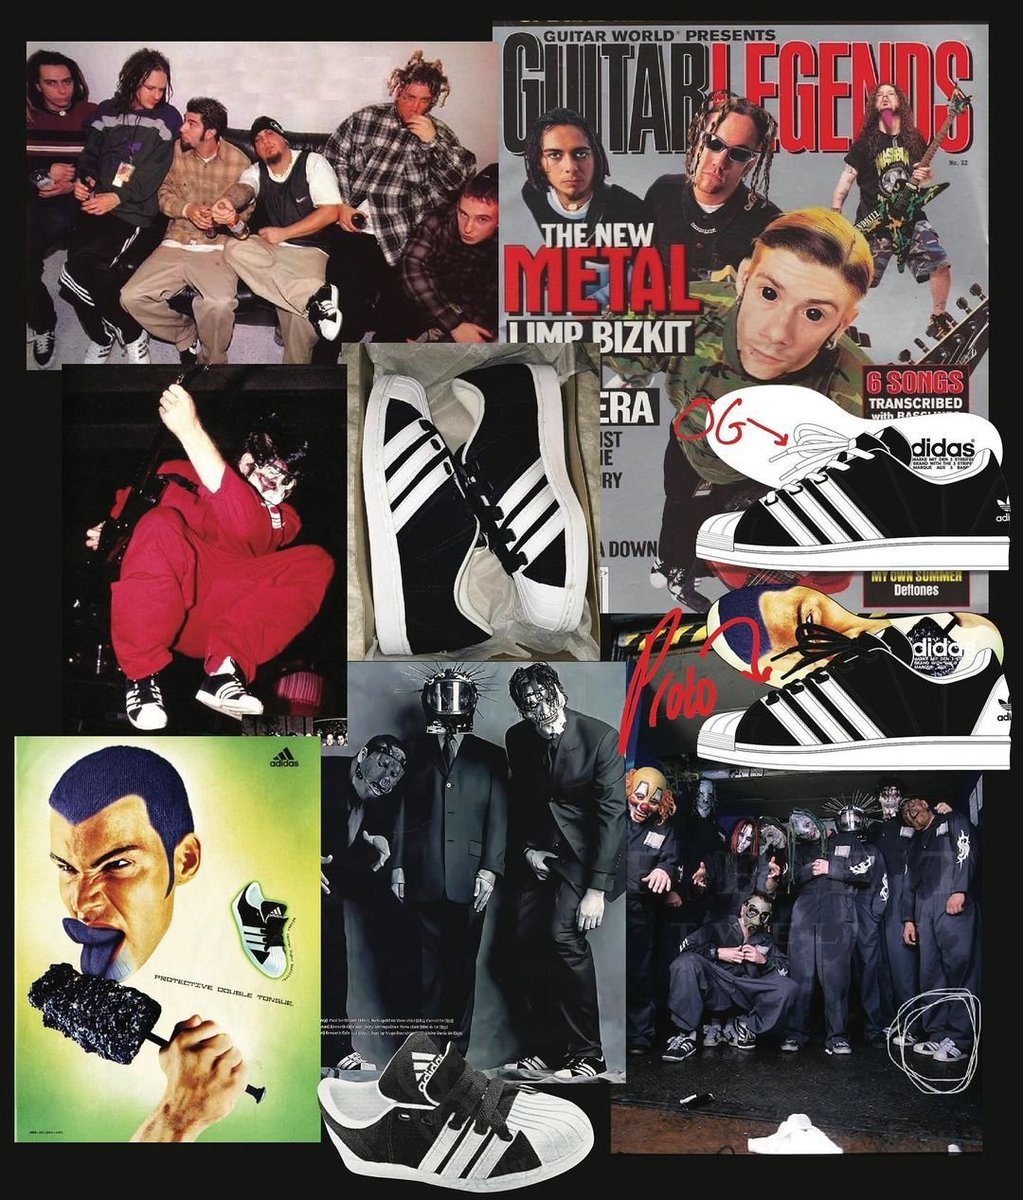 crazy ass moments in nu metal history Twitter: "ADIDAS relaunch their vintage Superstar design with advertisement featuring members of Limp Bizkit, Deftones, and Slipknot (2022) https://t.co/QHekLB1oO2" / Twitter